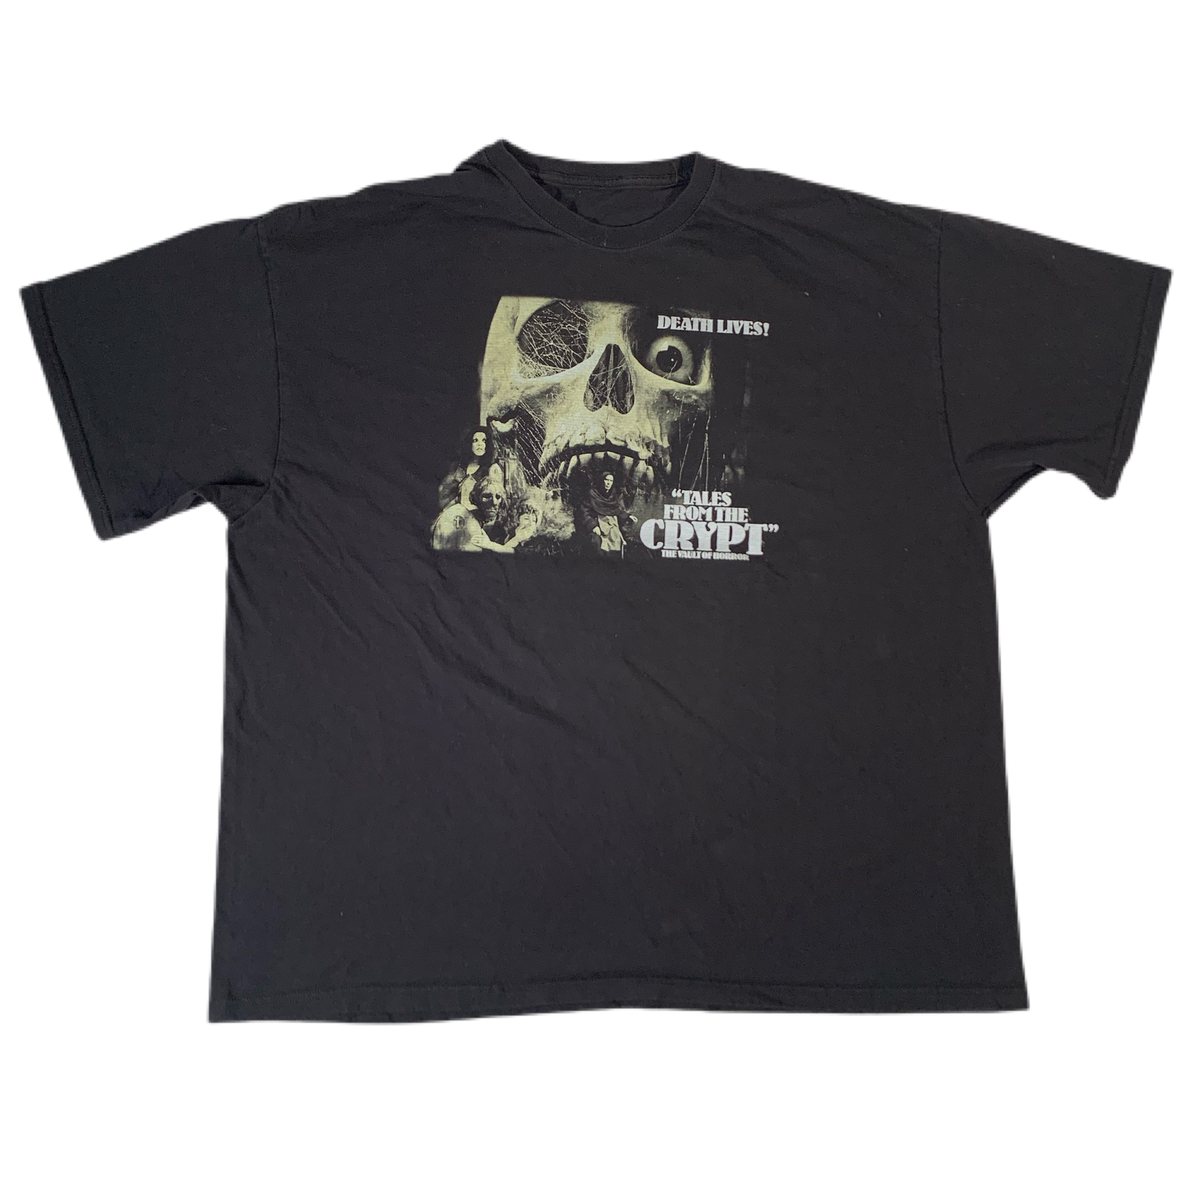 Vintage Tales From The Crypt “Death Lives!” T-Shirt - jointcustodydc